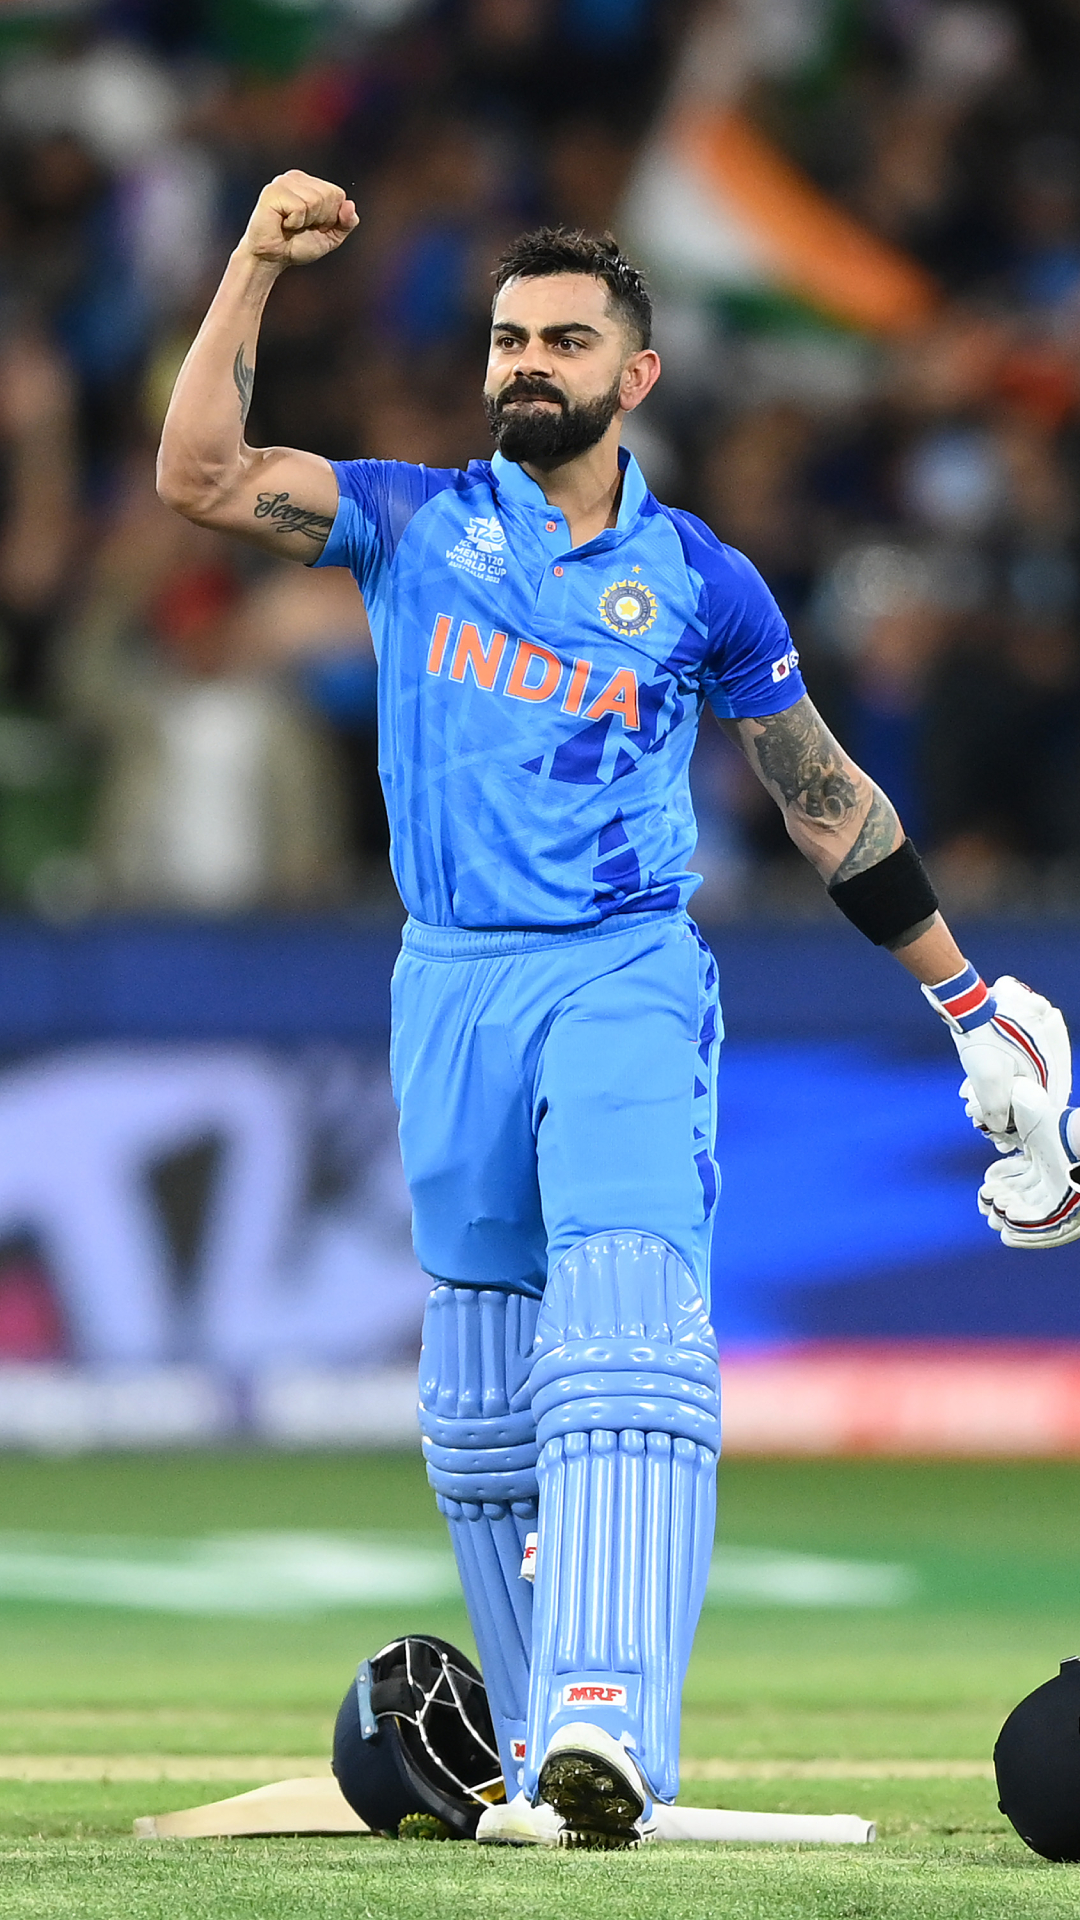 From Virat Kohli to Sachin Tendulkar, players to hit most fifties in all formats of cricket
